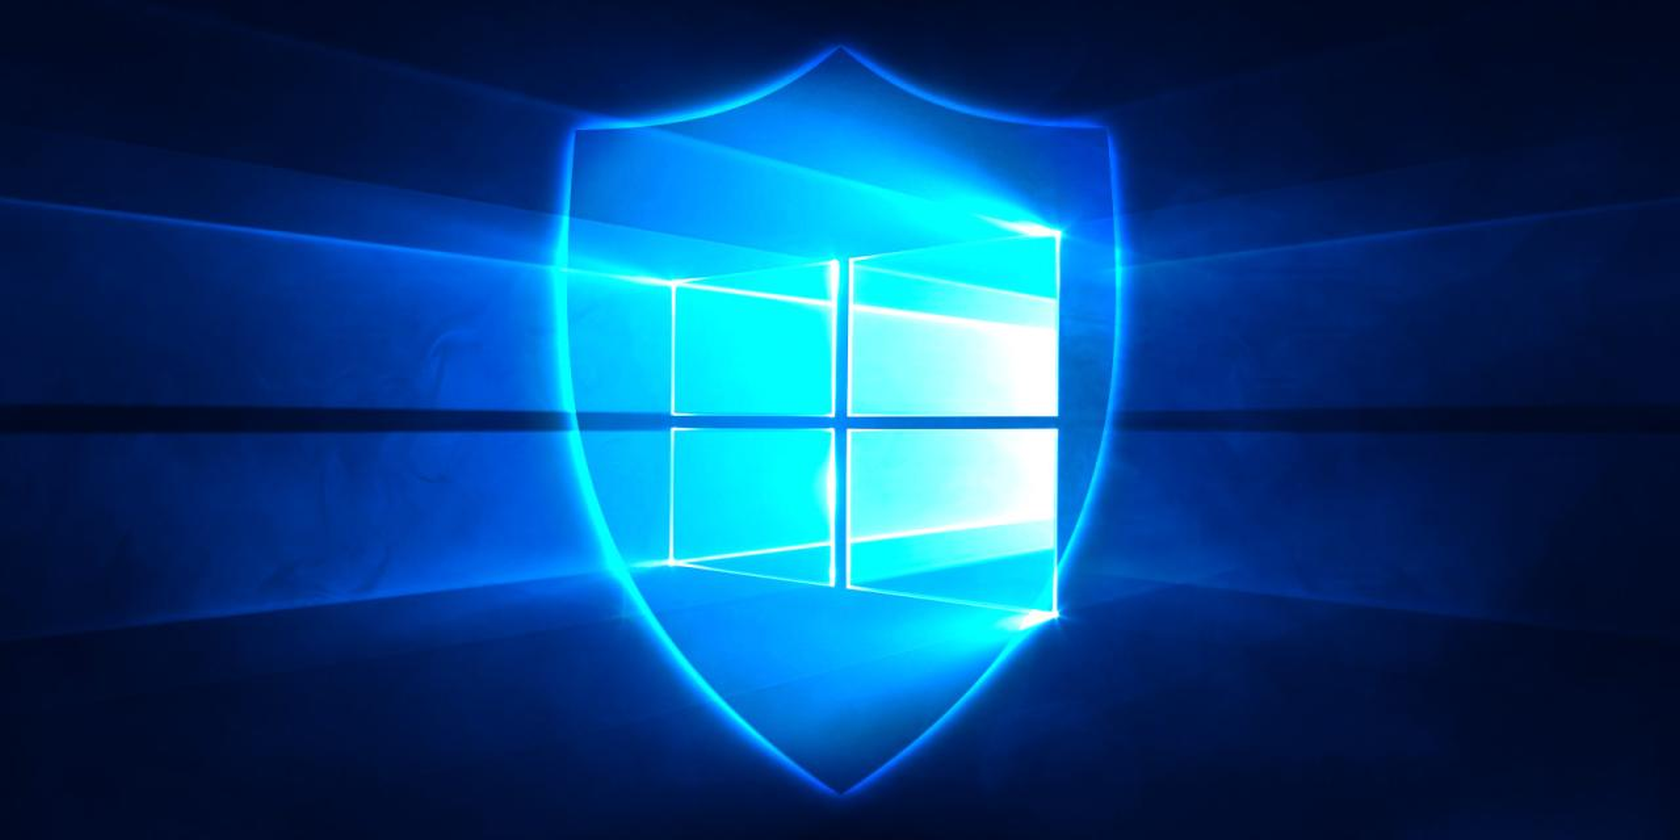 6 Easy Ways to Boost Security in Microsoft Defender and Windows 10